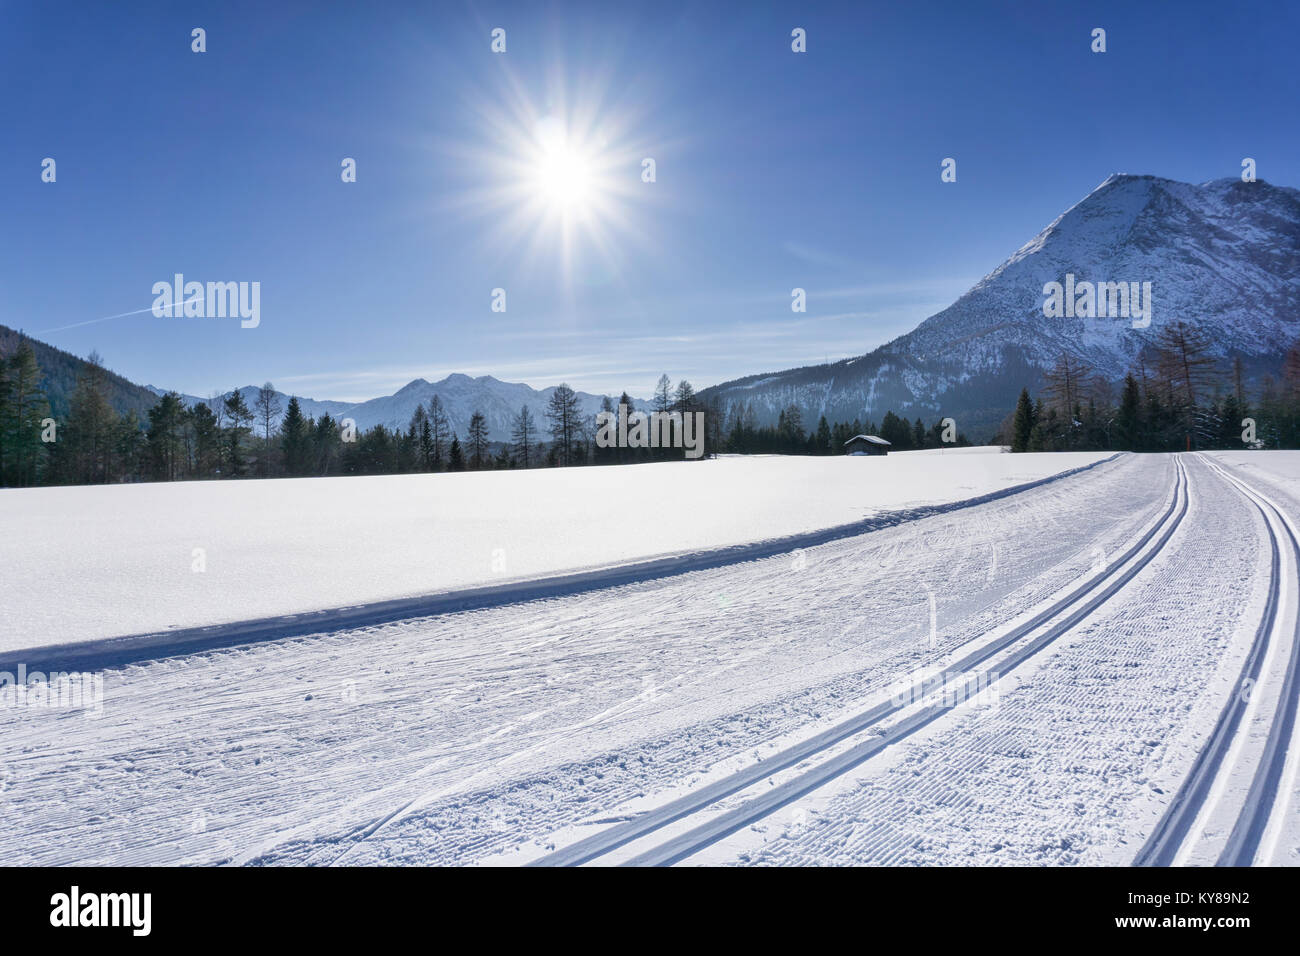 Winter mountain landscape with groomed ski track and blue sky in sunny day. Tirol, Alps, Austria. Stock Photo